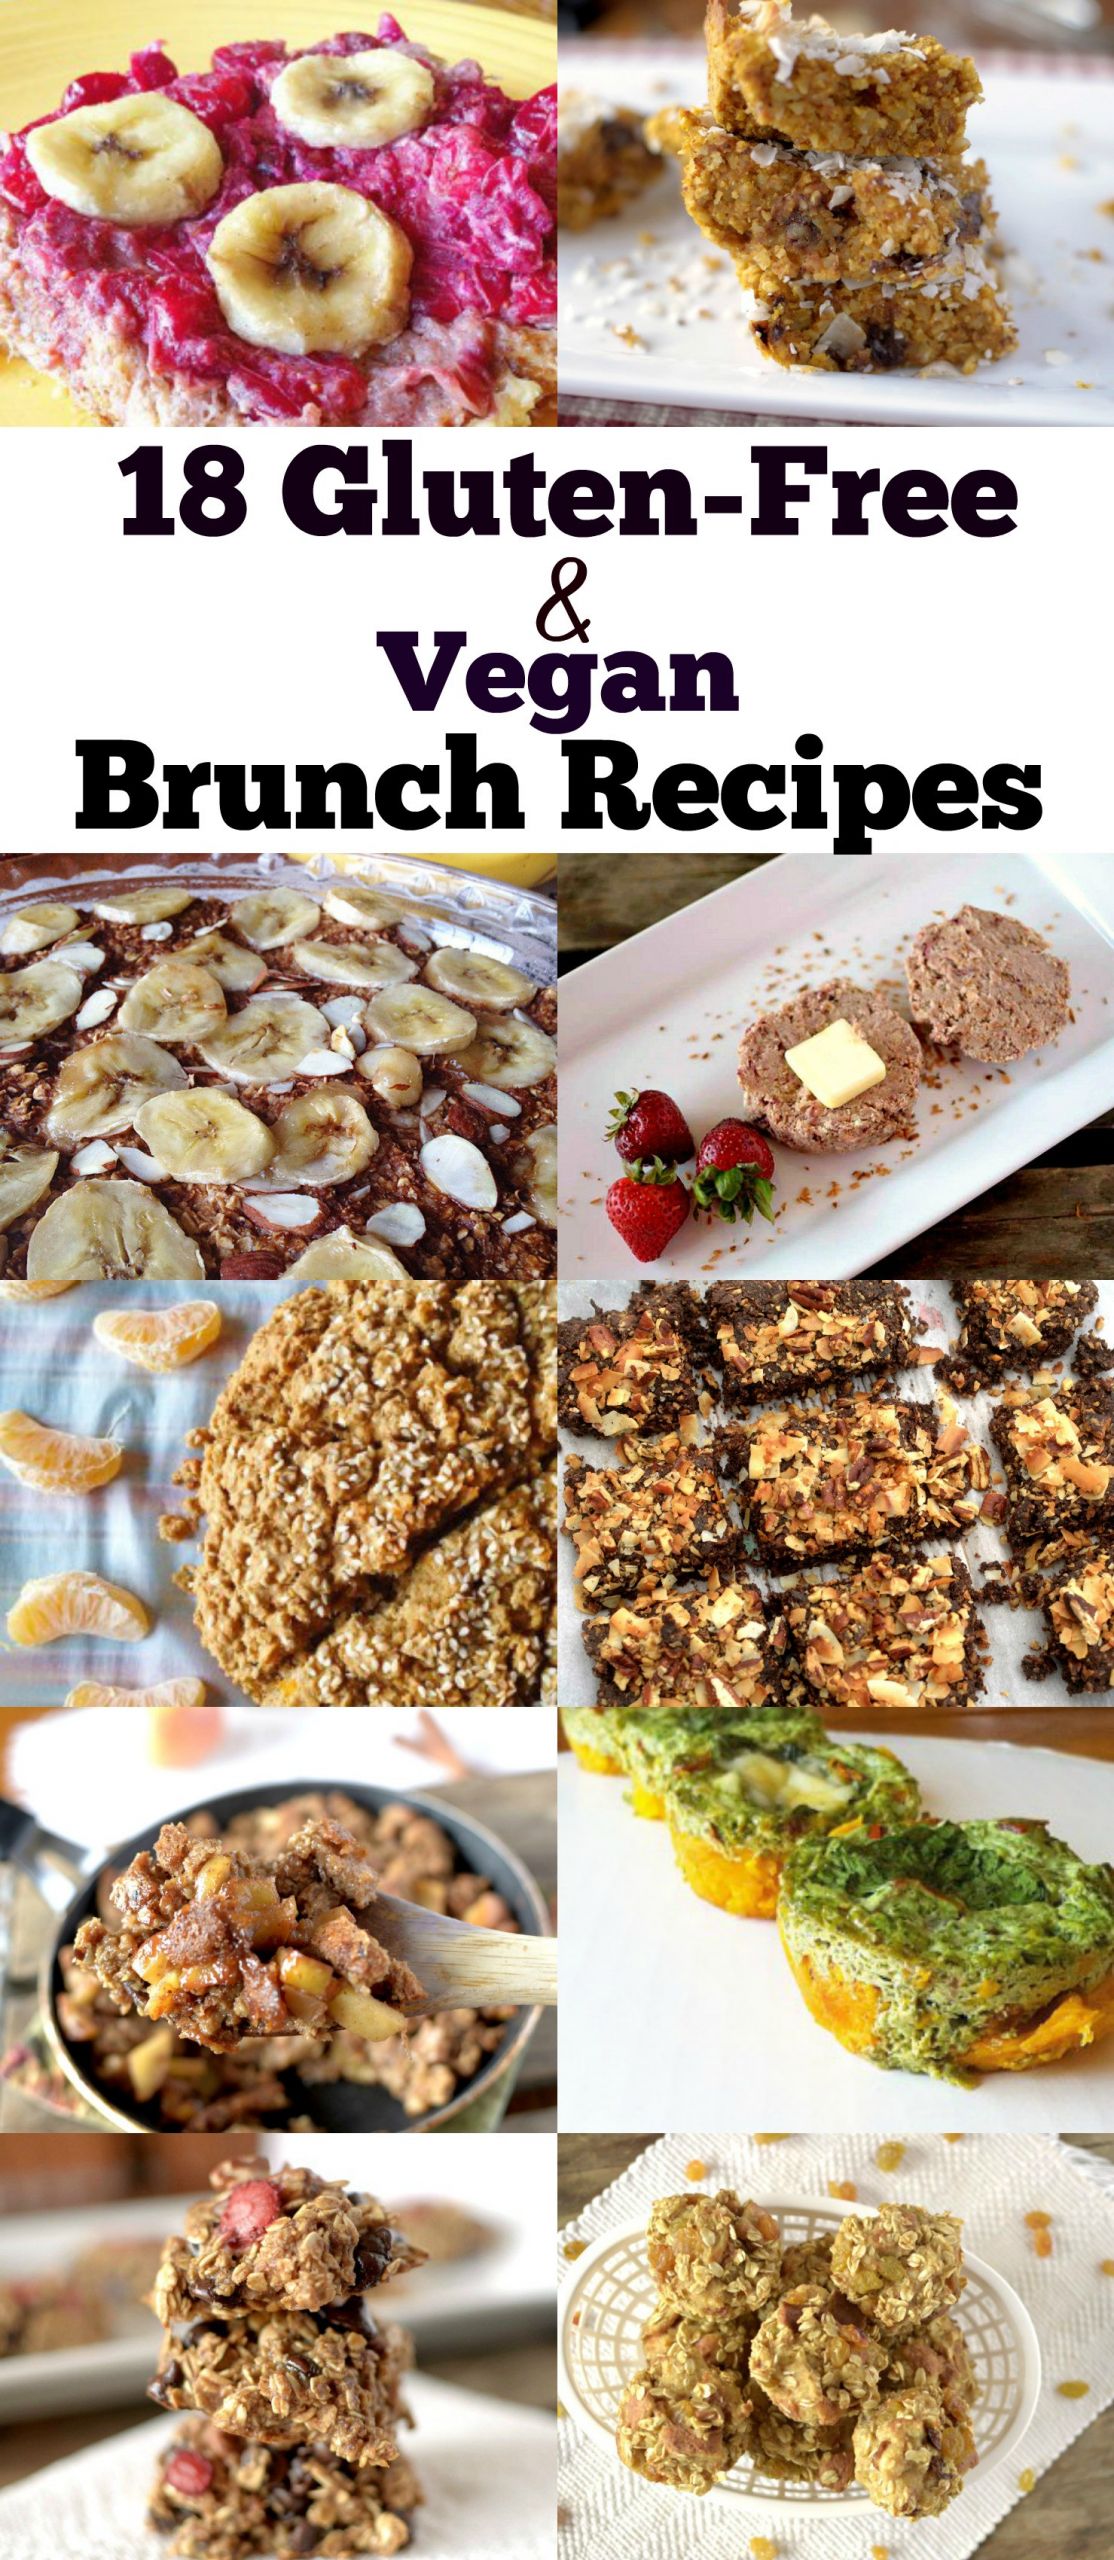 Dairy Free Brunch Recipes
 18 Gluten Free and Vegan Brunch Recipes Clean and